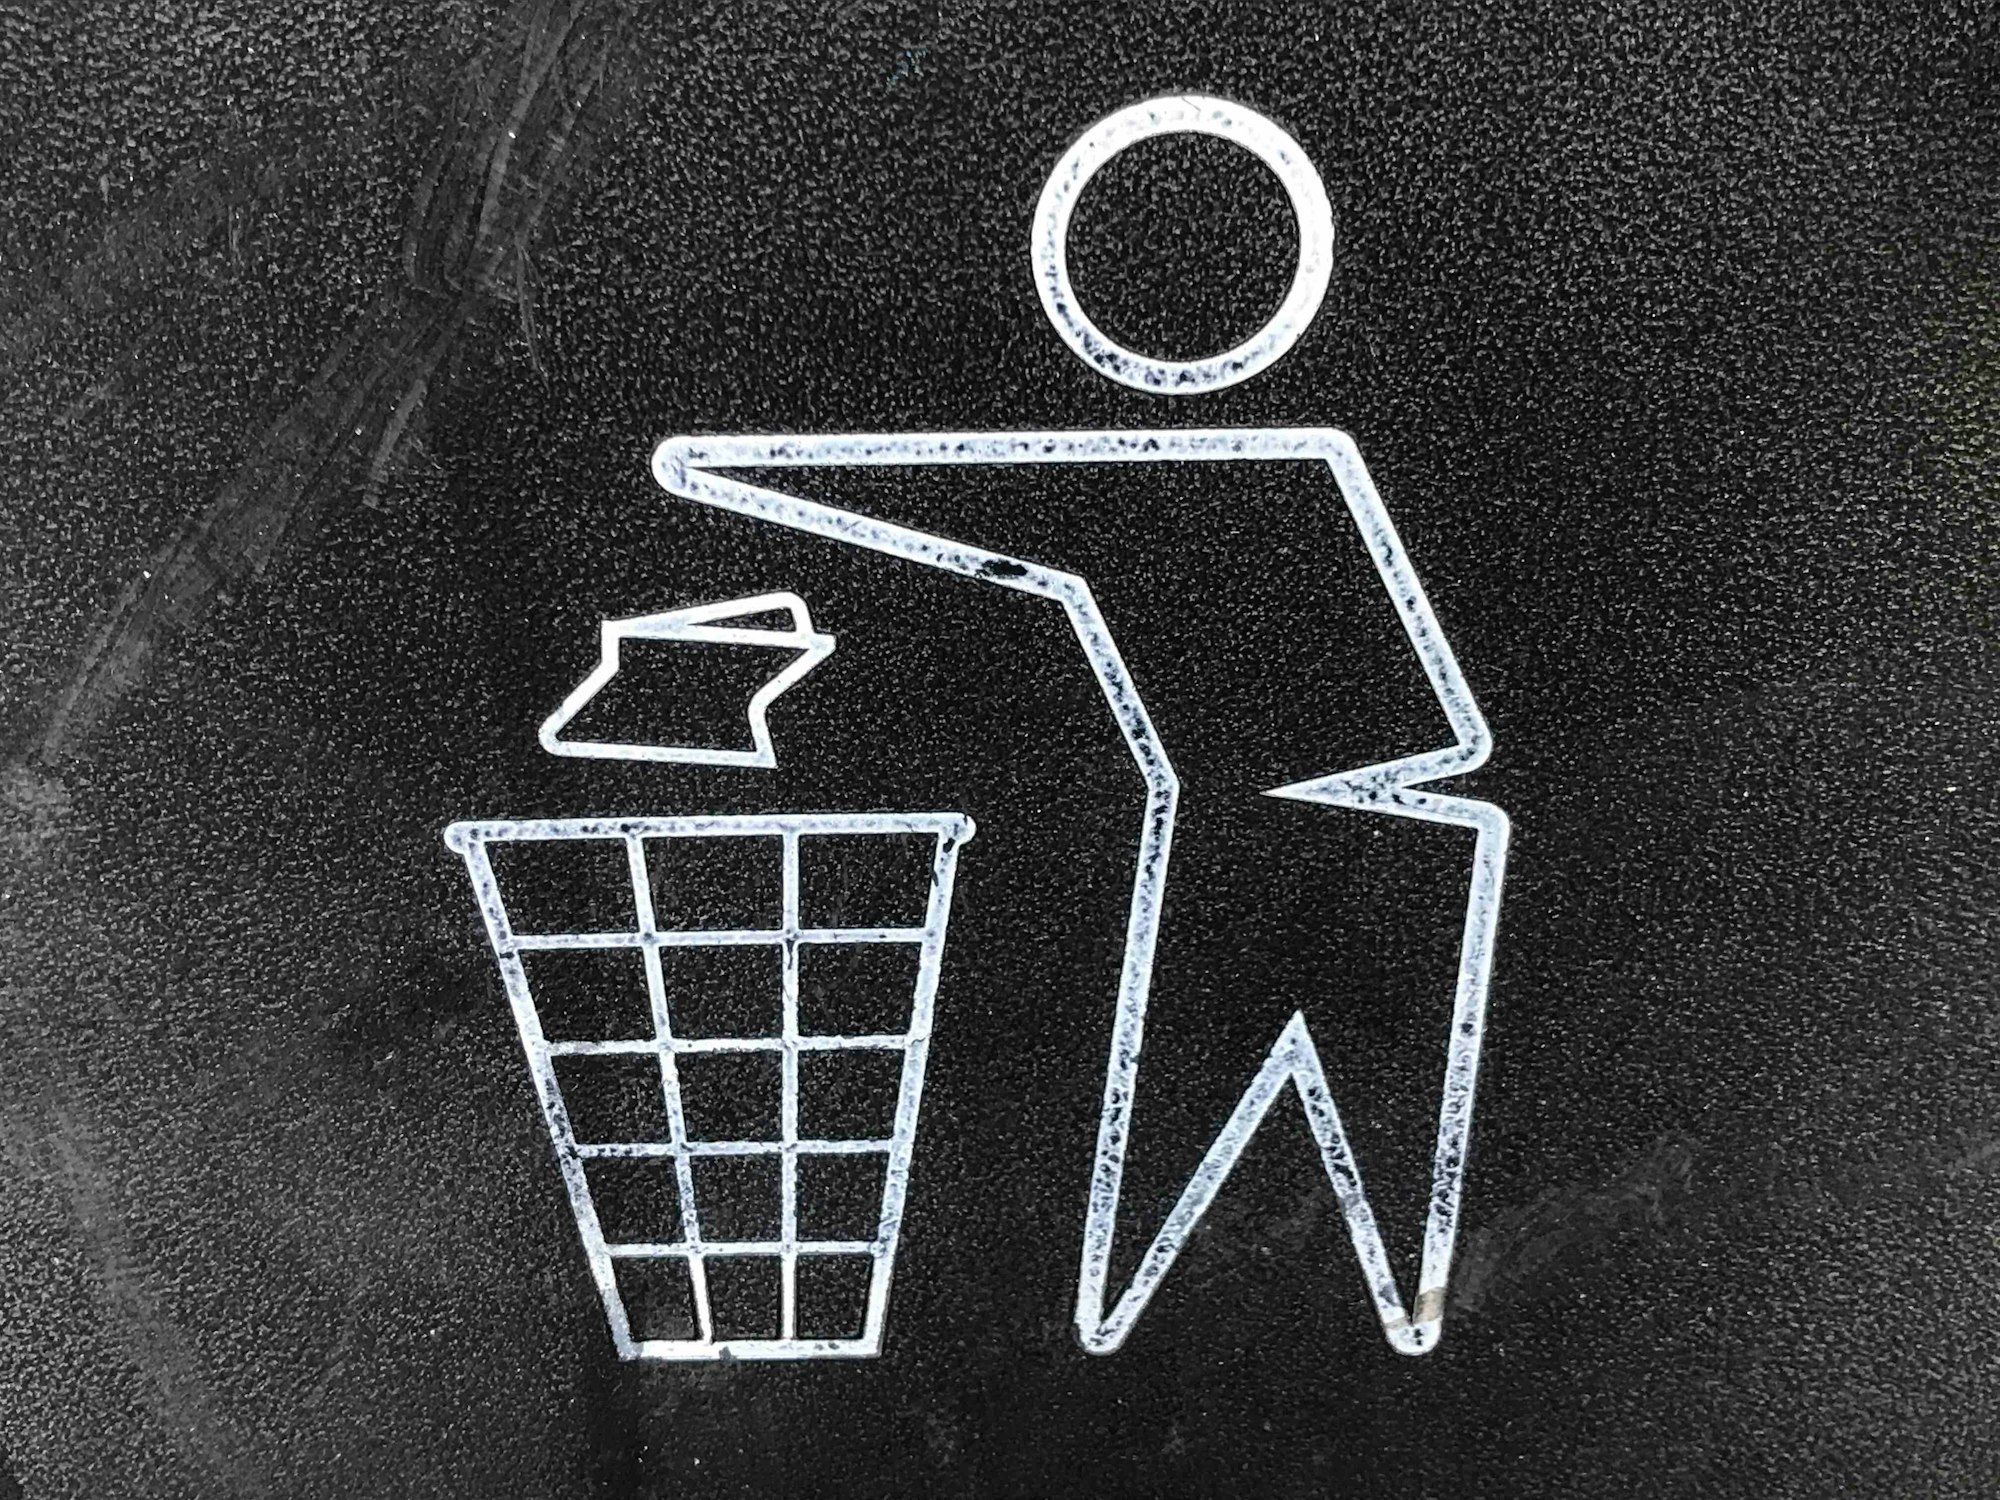 Close up of a recycle garbage bin logo at Pershing Square in Los Angeles, California.